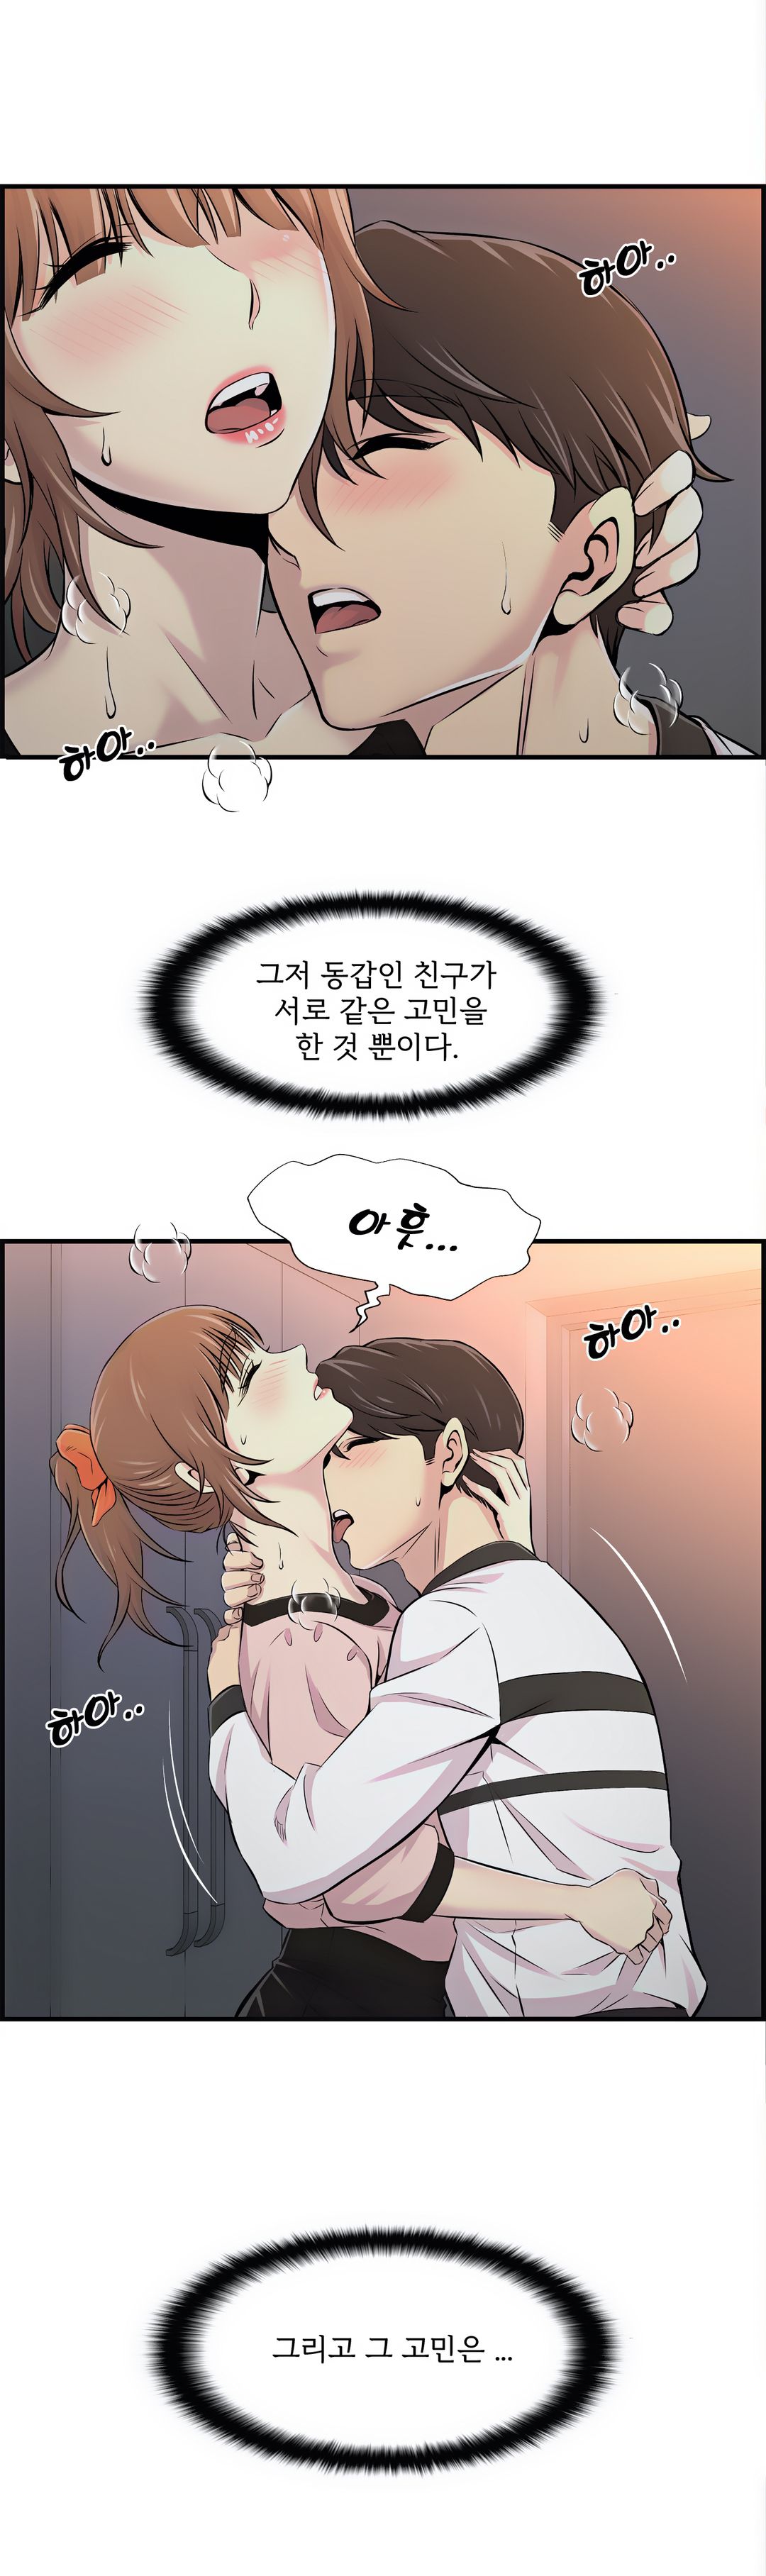 Cram School Scandal Raw - Chapter 11 Page 17